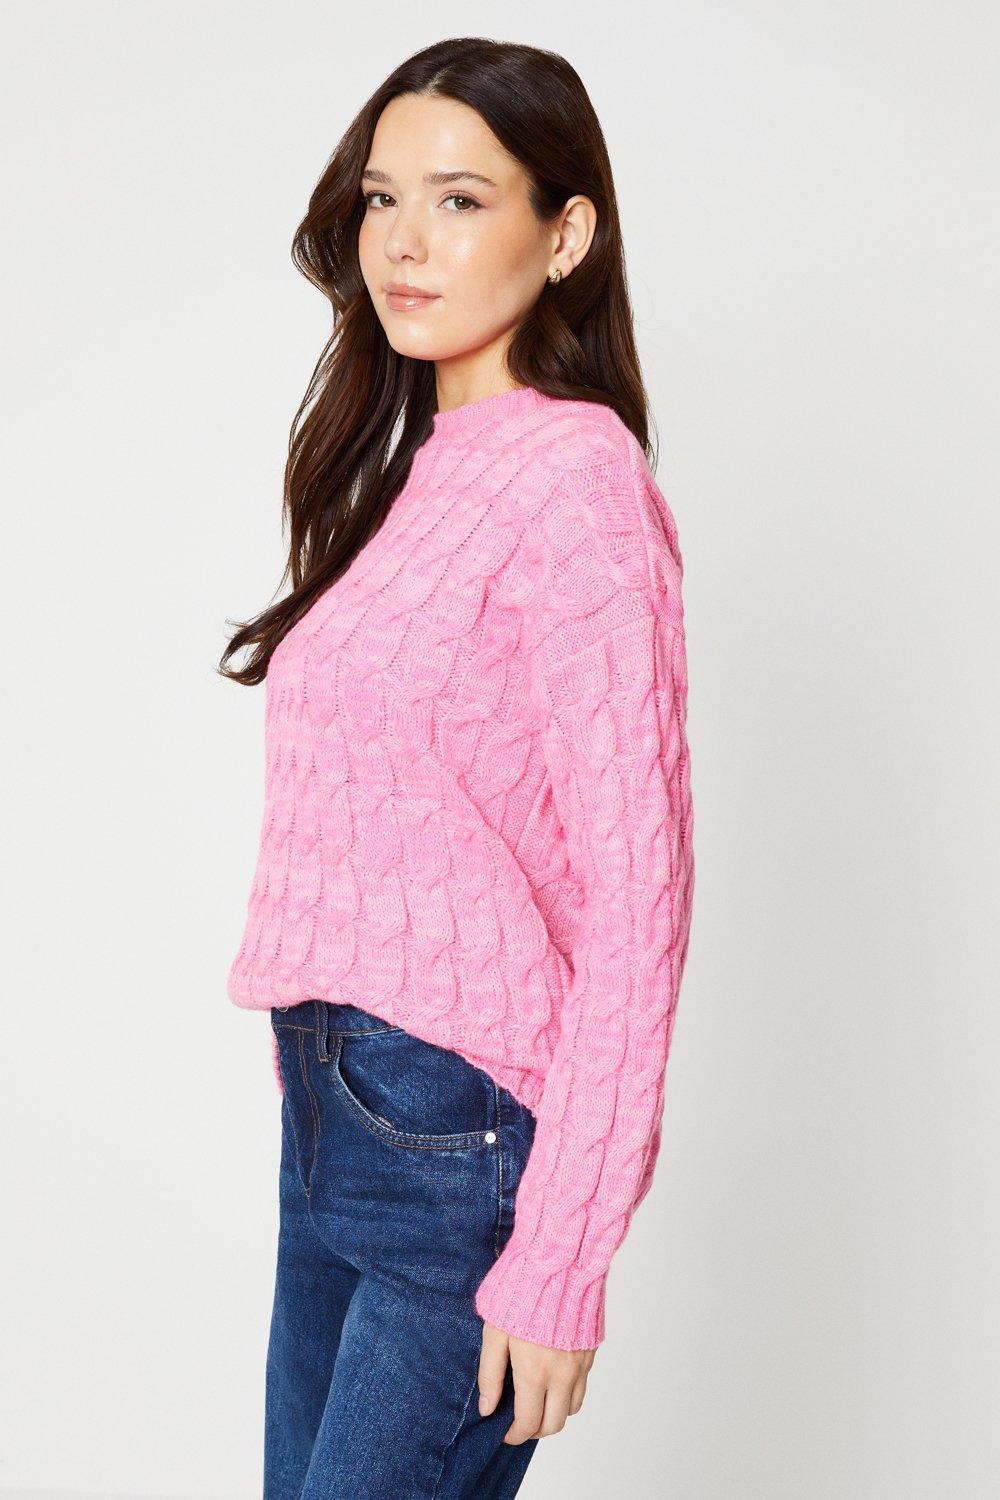 Women’s Long Sleeve Cable Knit Jumper - pink - L